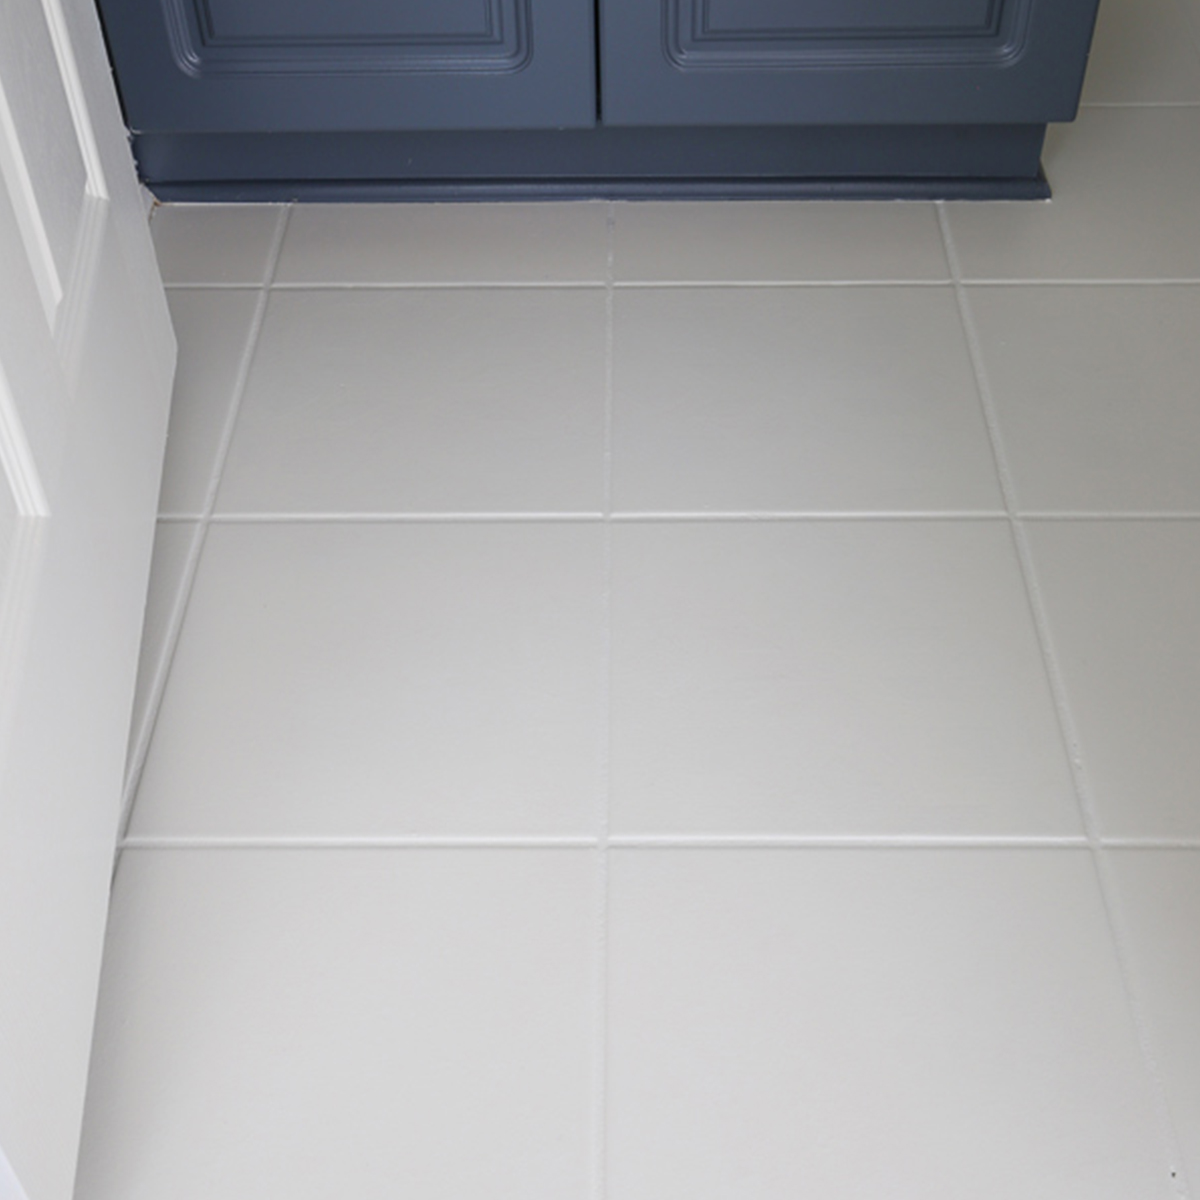 How To Paint Tile Floor In A Bathroom, Is There A Paint For Tile Floors